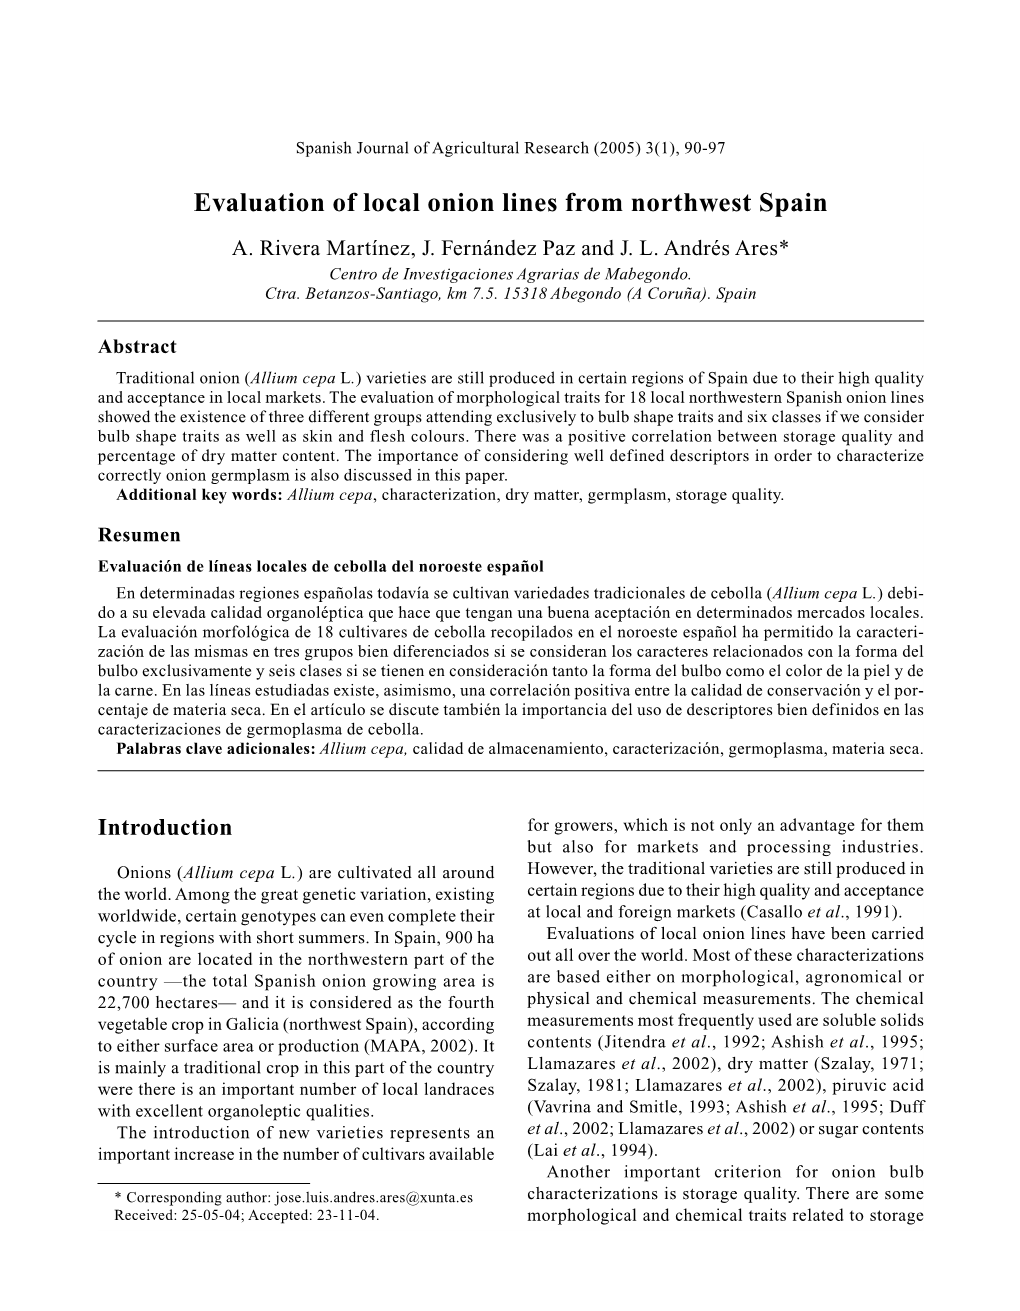 Evaluation of Local Onion Lines from Northwest Spain A